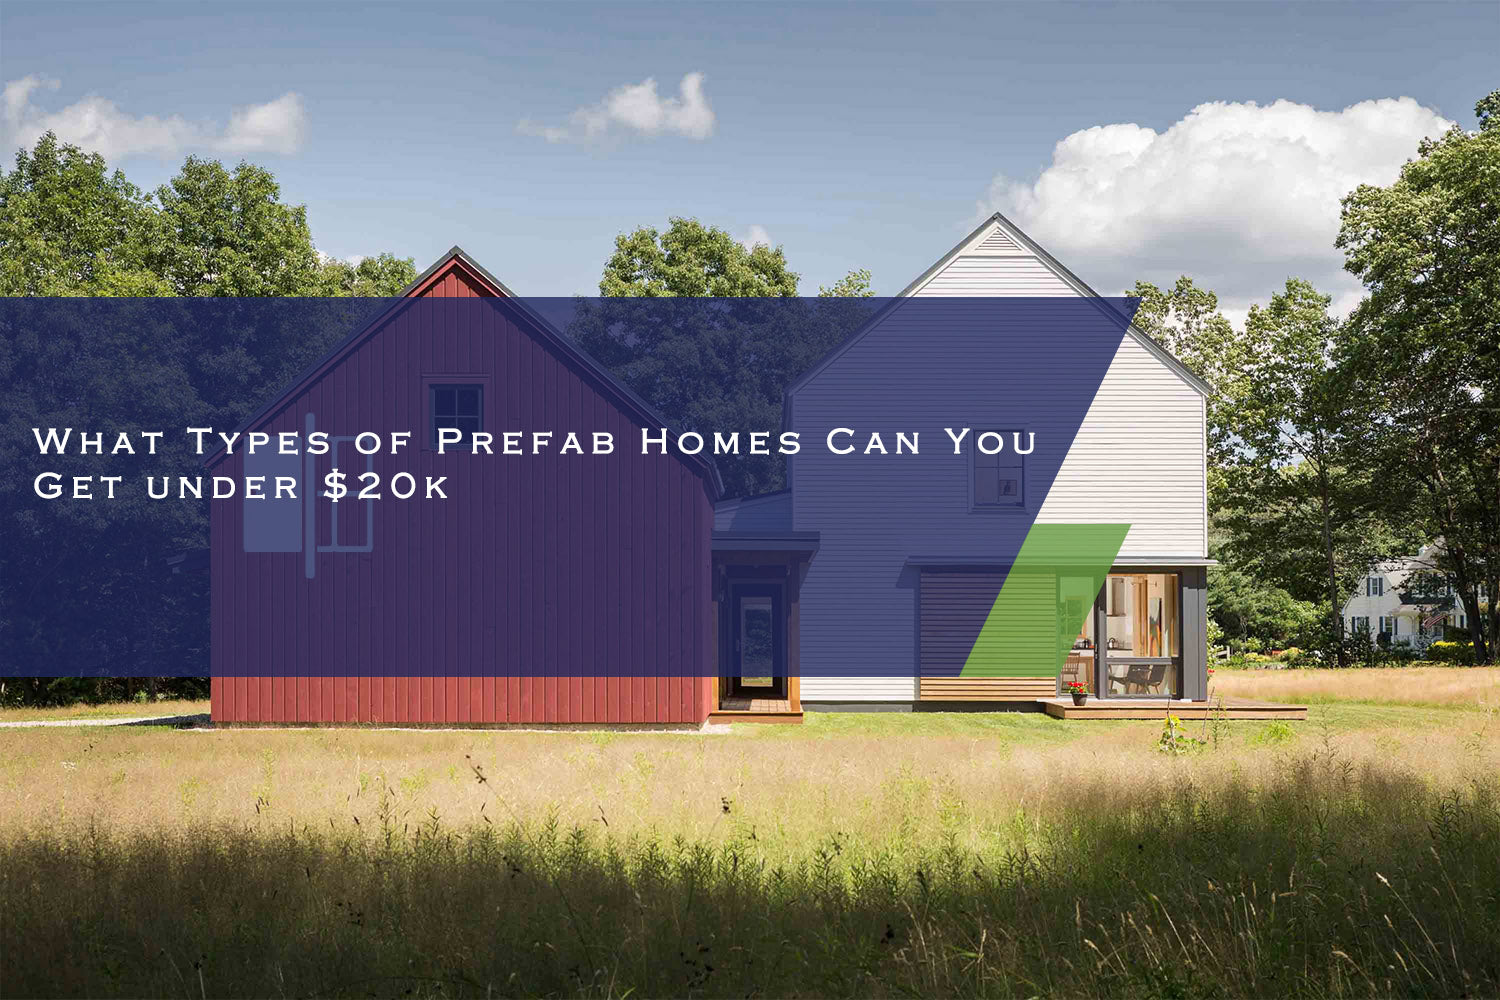 What Types of Prefab Homes Can You Get under $20k?